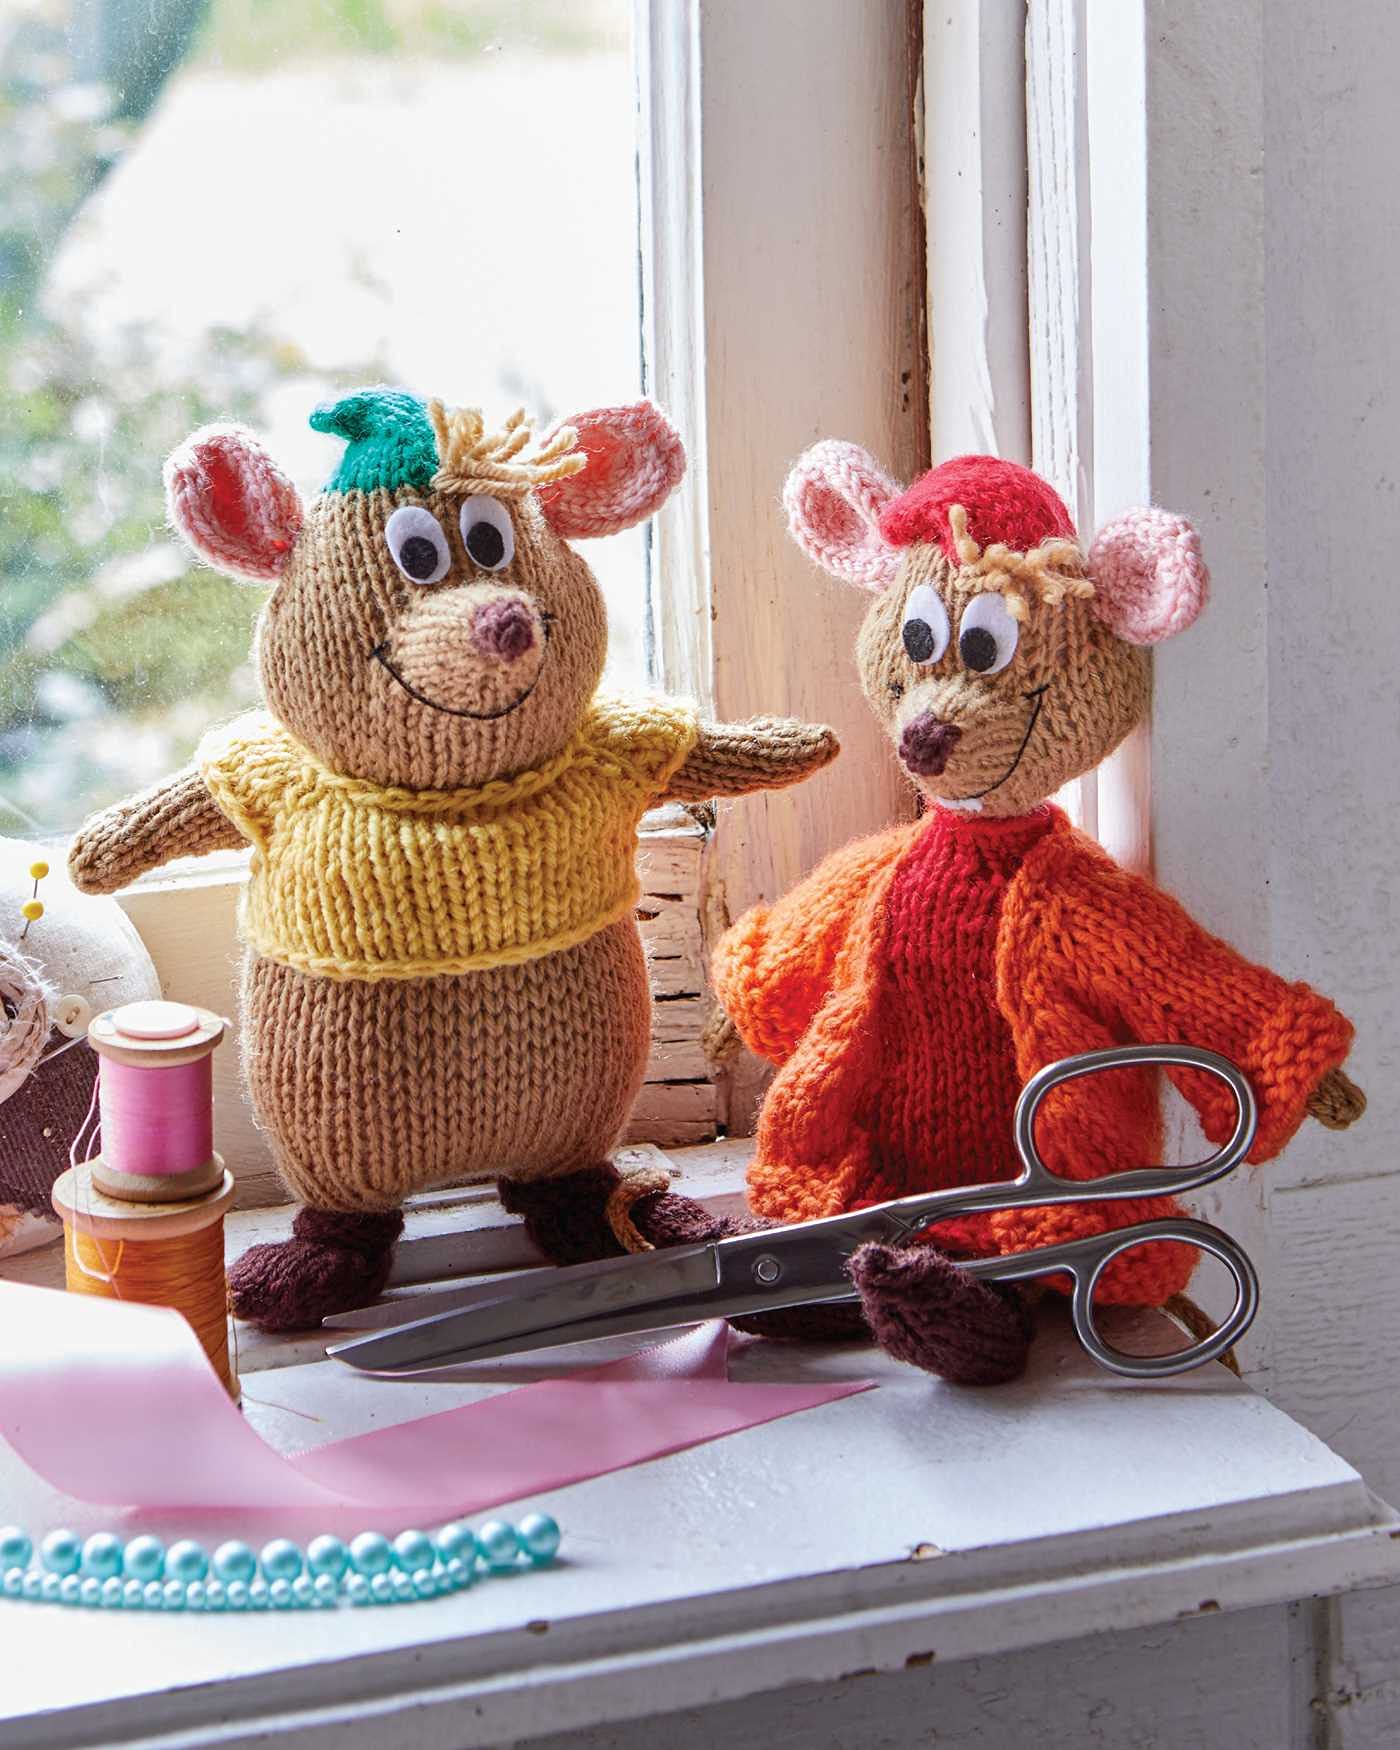 Knitting with Disney by Tanis Gray